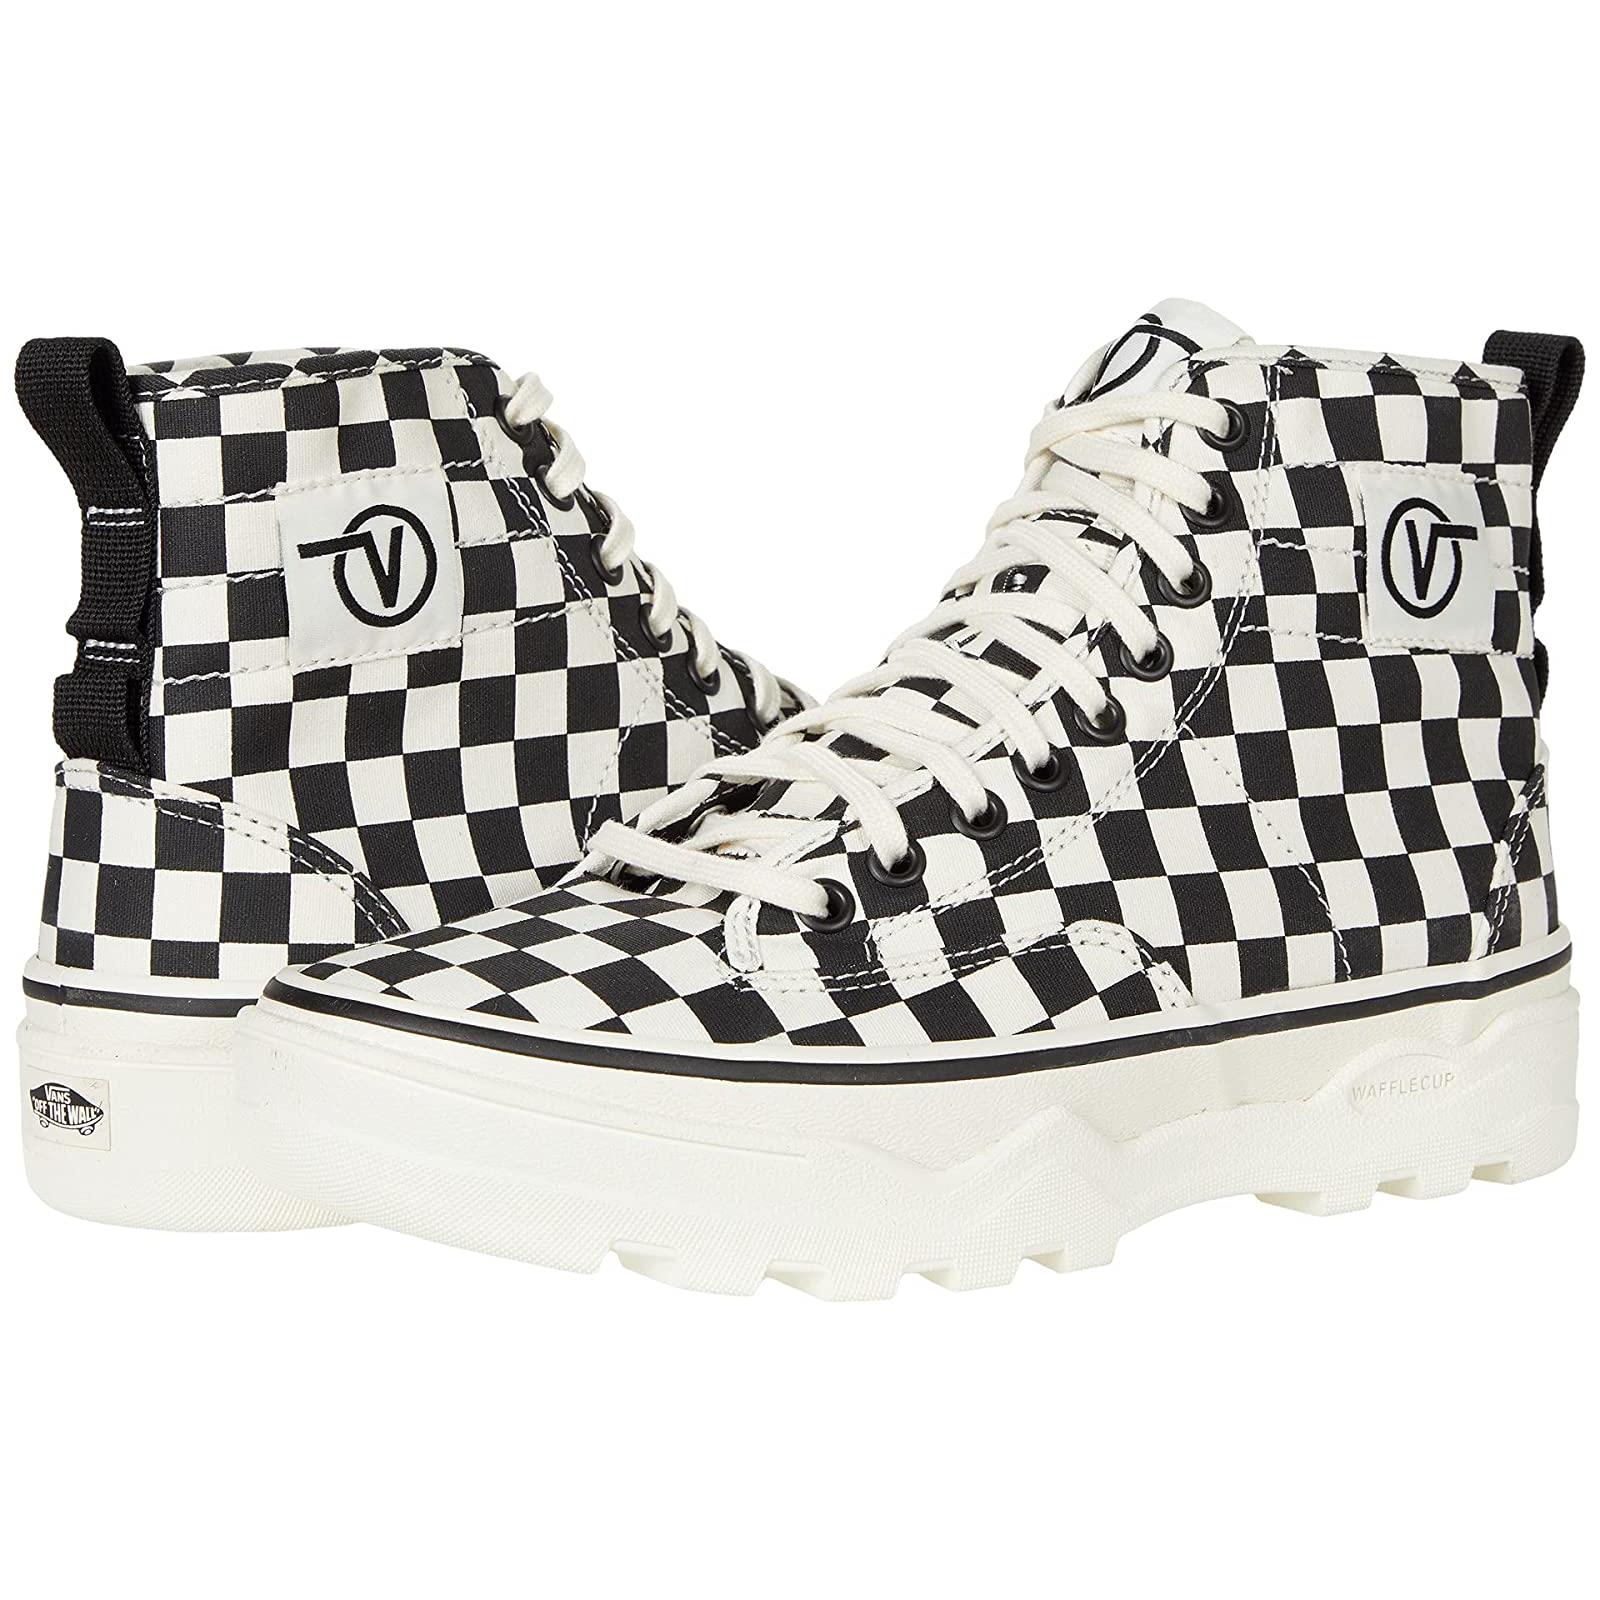 Unisex Sneakers Athletic Shoes Vans Sentry WC (Canvas) Checkerboard/Marshmallow